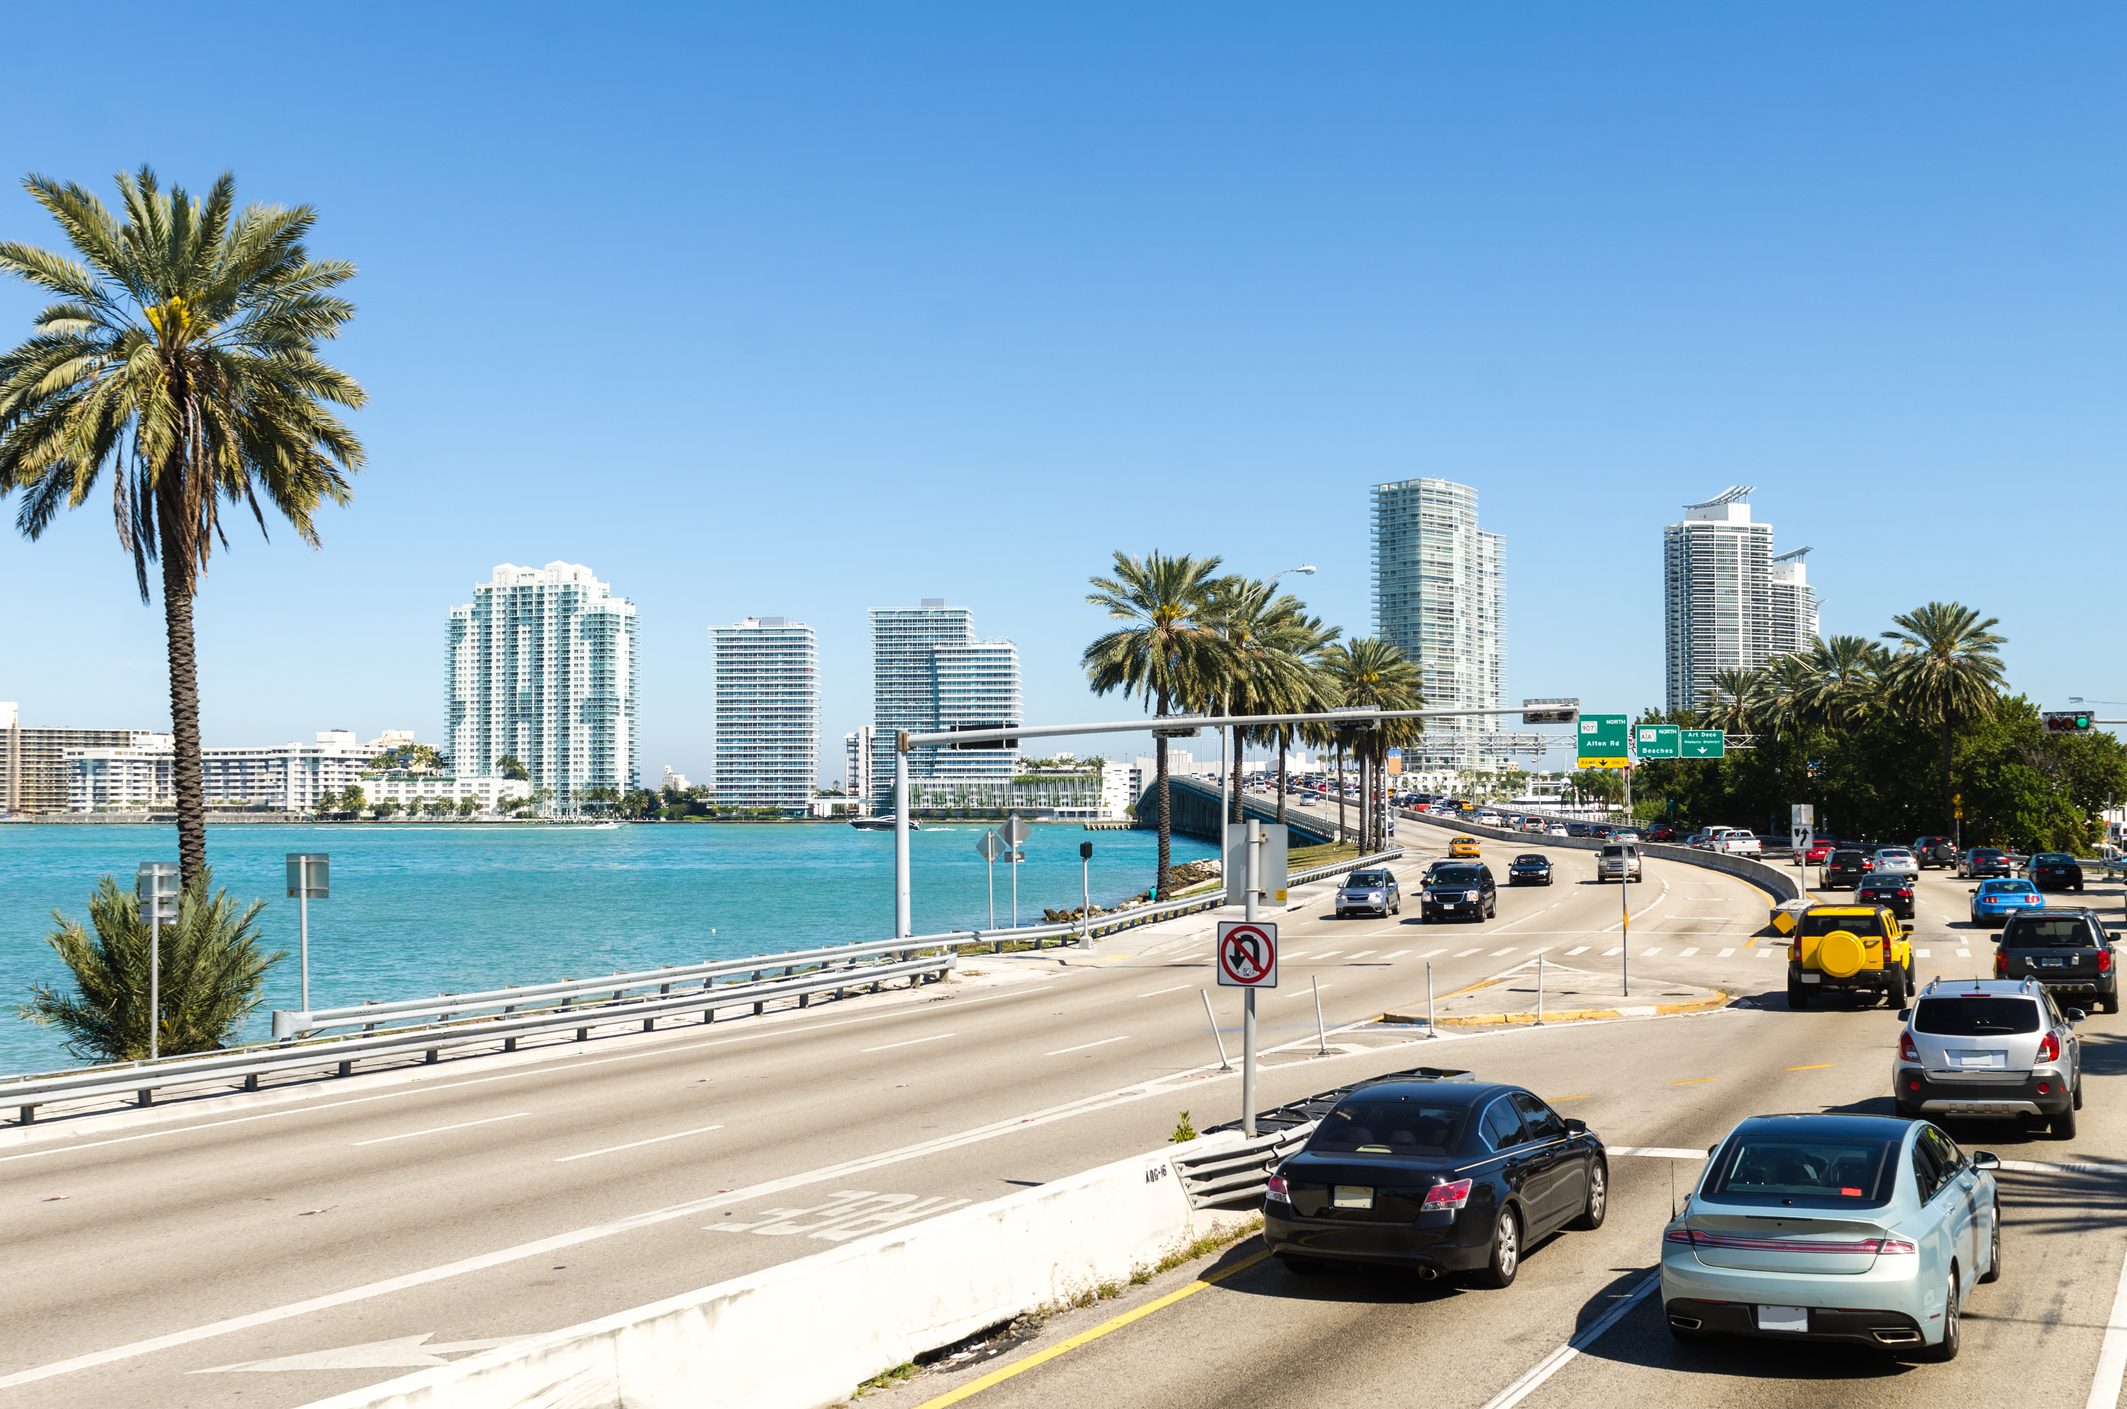 Skyline of Miami with buildings, palm trees, and vehicles on a highway by the water